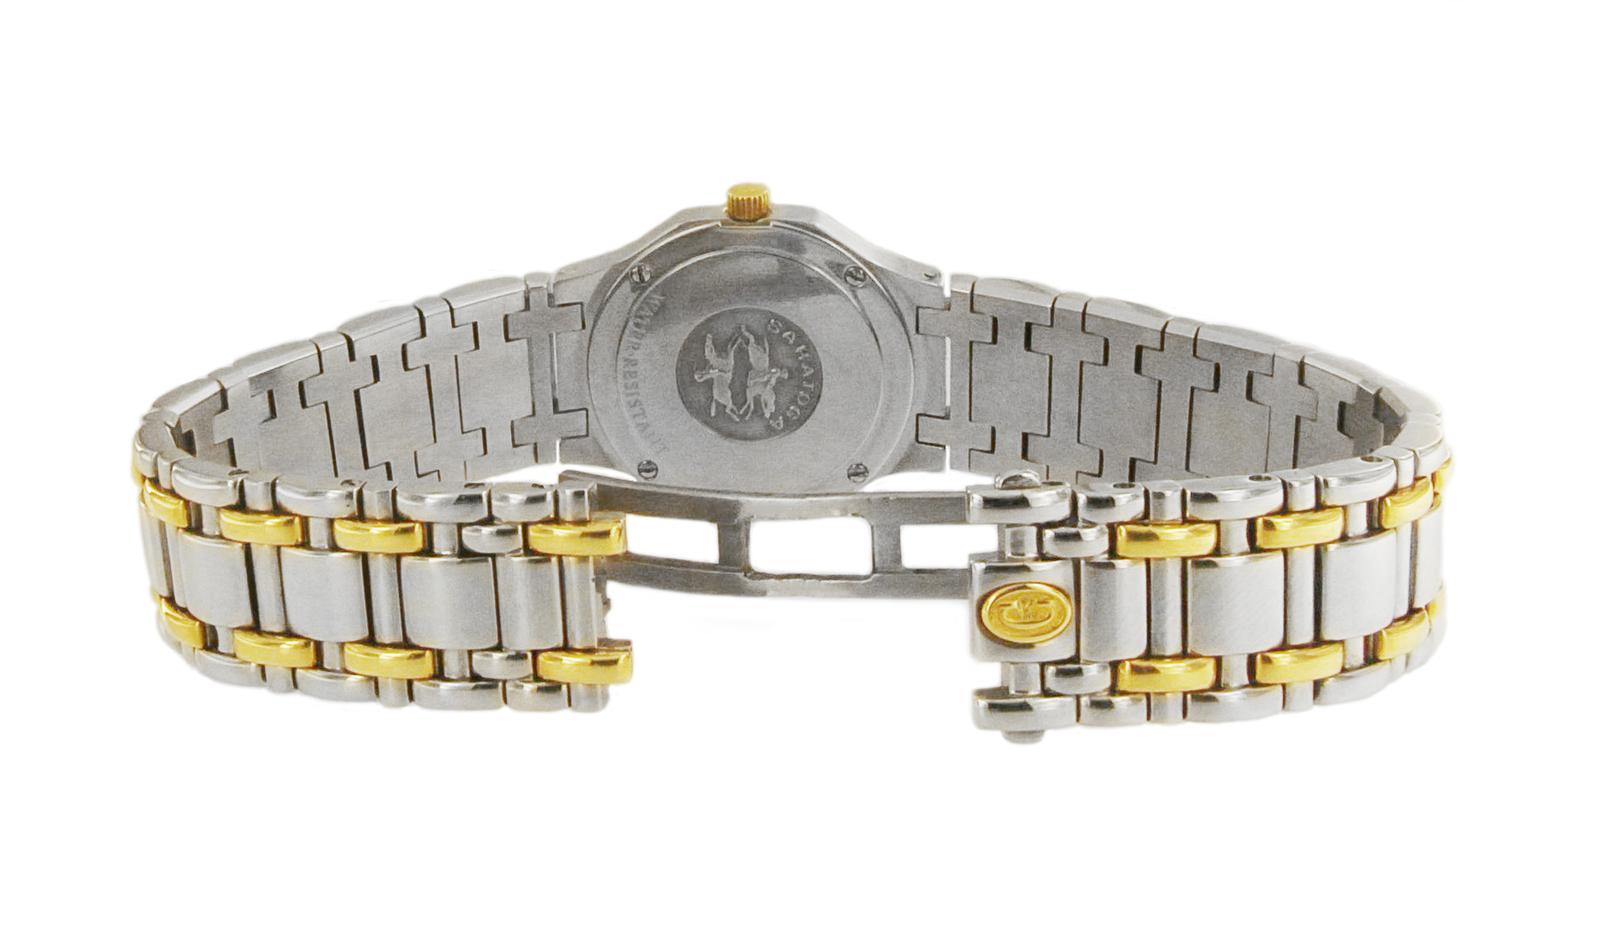 CONCORD SARATOGA 18K YELLOW & STEEL DIAMOND BEZEL WATCH 15 73 287

-Mint condition
-Case size: 23mm
-Case thickness: 6mm
-Movement: Quartz
-18k Yellow Gold & Stainless steel
-Roman Numeral dial
-Cream dial

*Comes with box, no papers.
Retail: $6,660